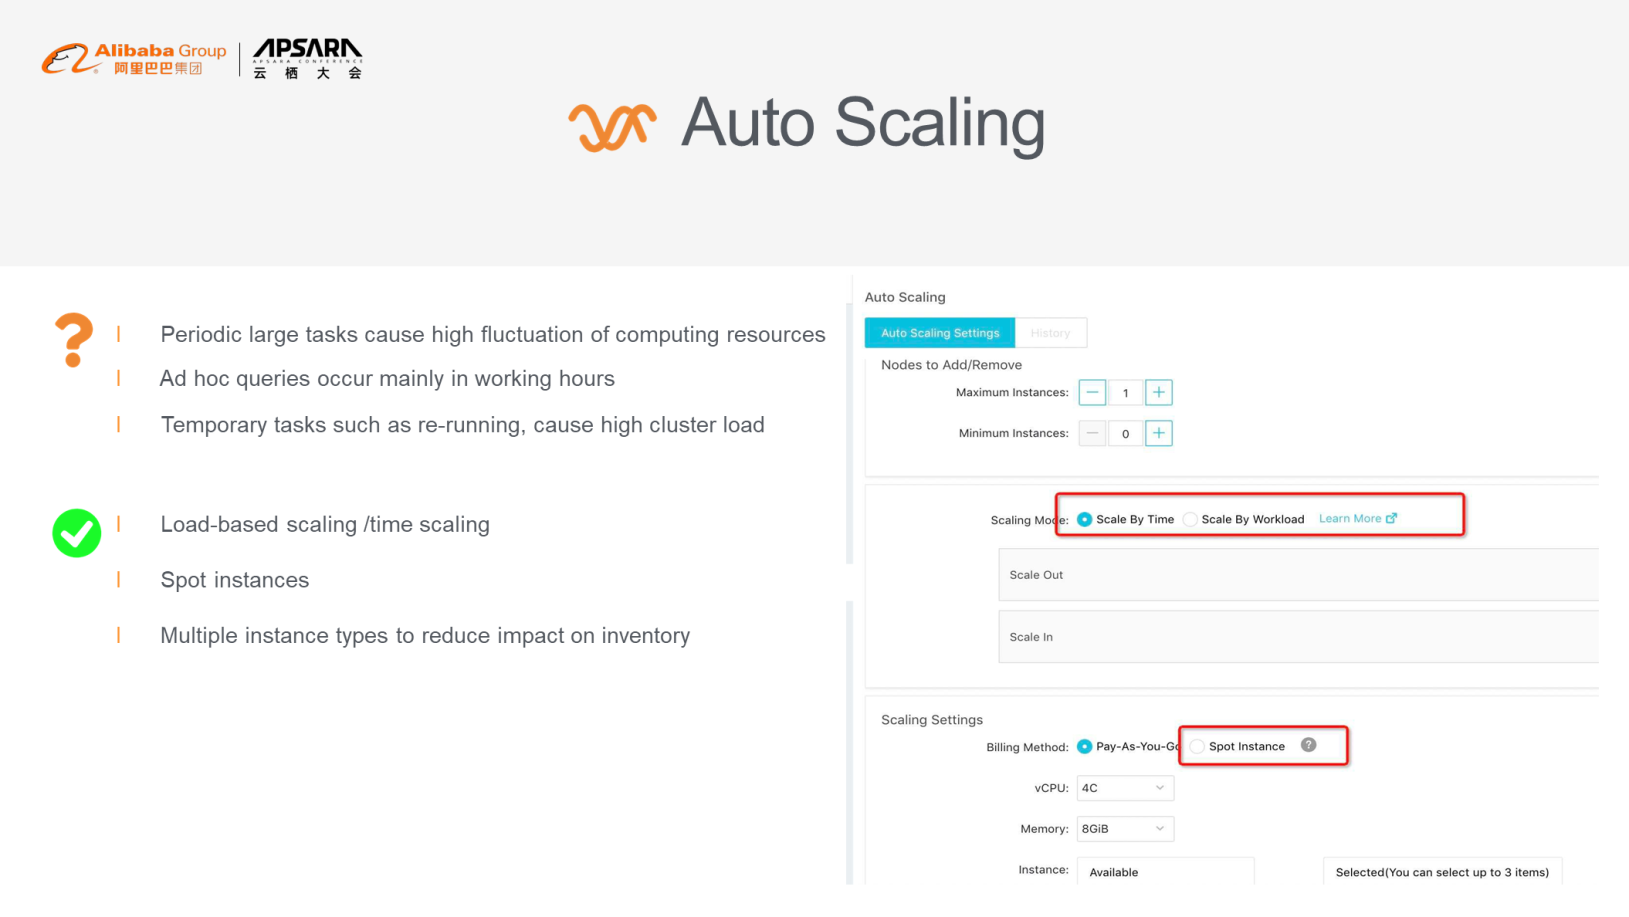 EMR supports auto scaling